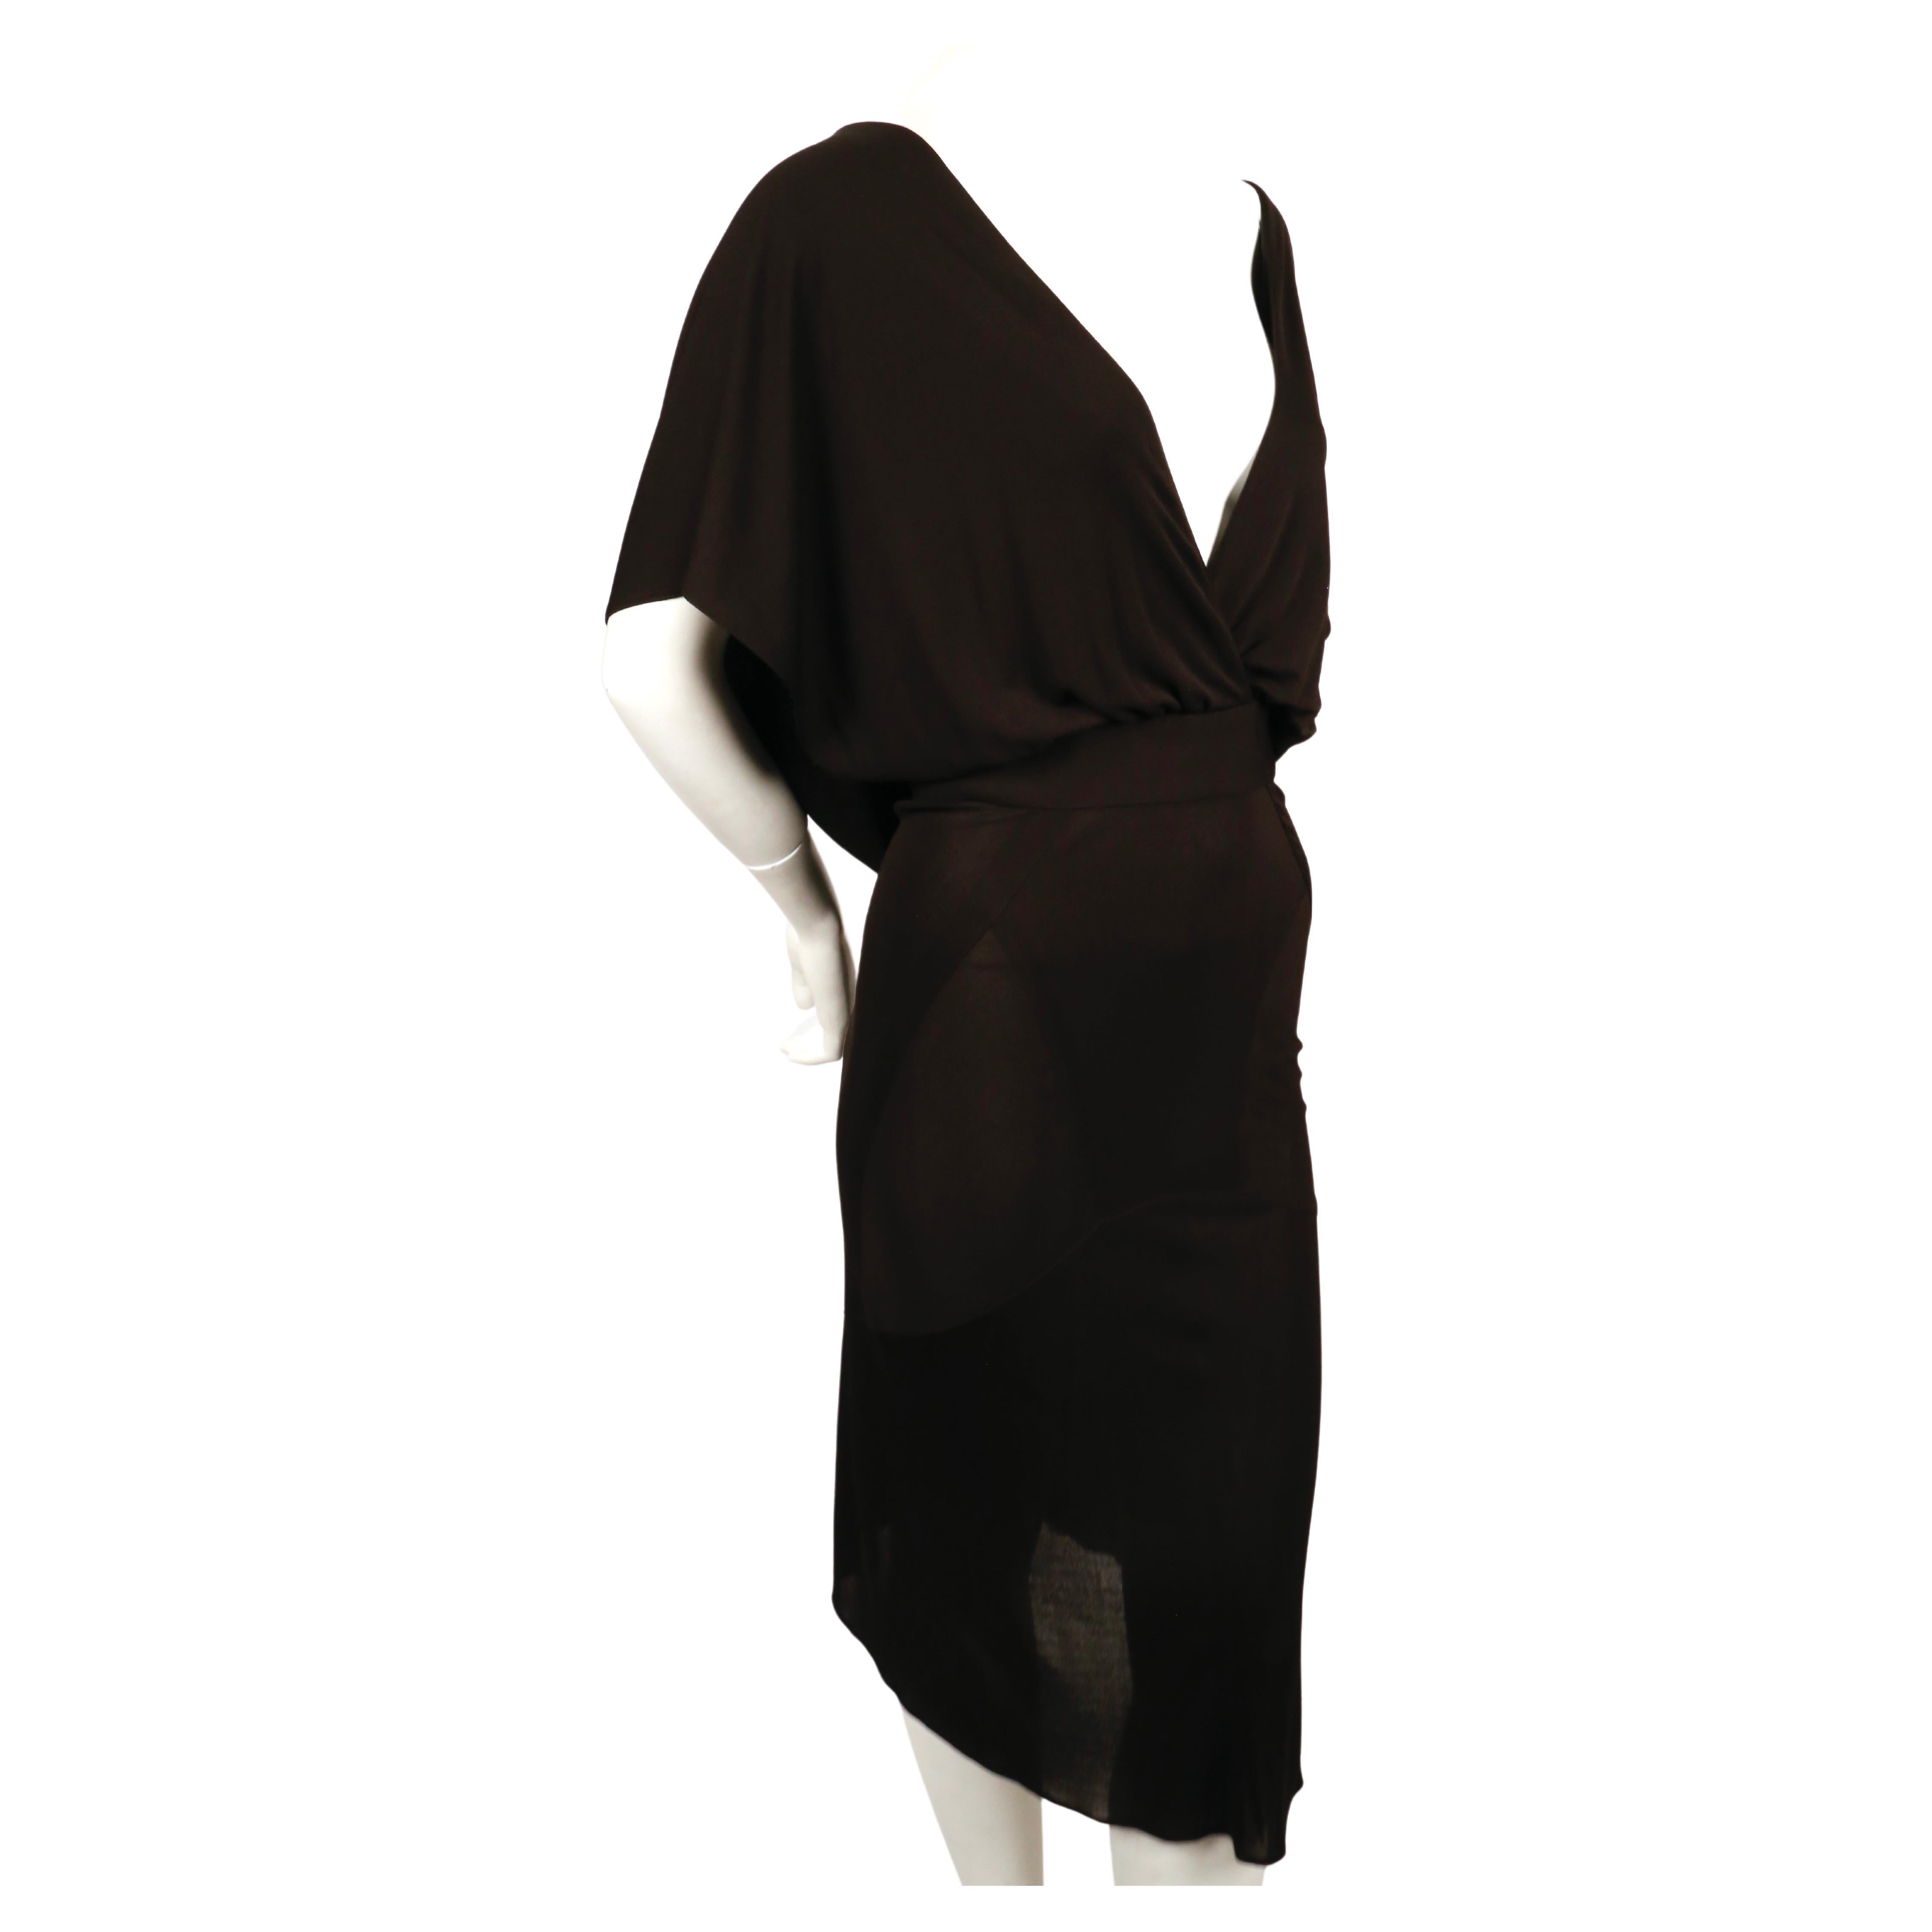 Women's or Men's very rare 1984 AZZEDINE ALAIA iconic hooded jersey dress For Sale